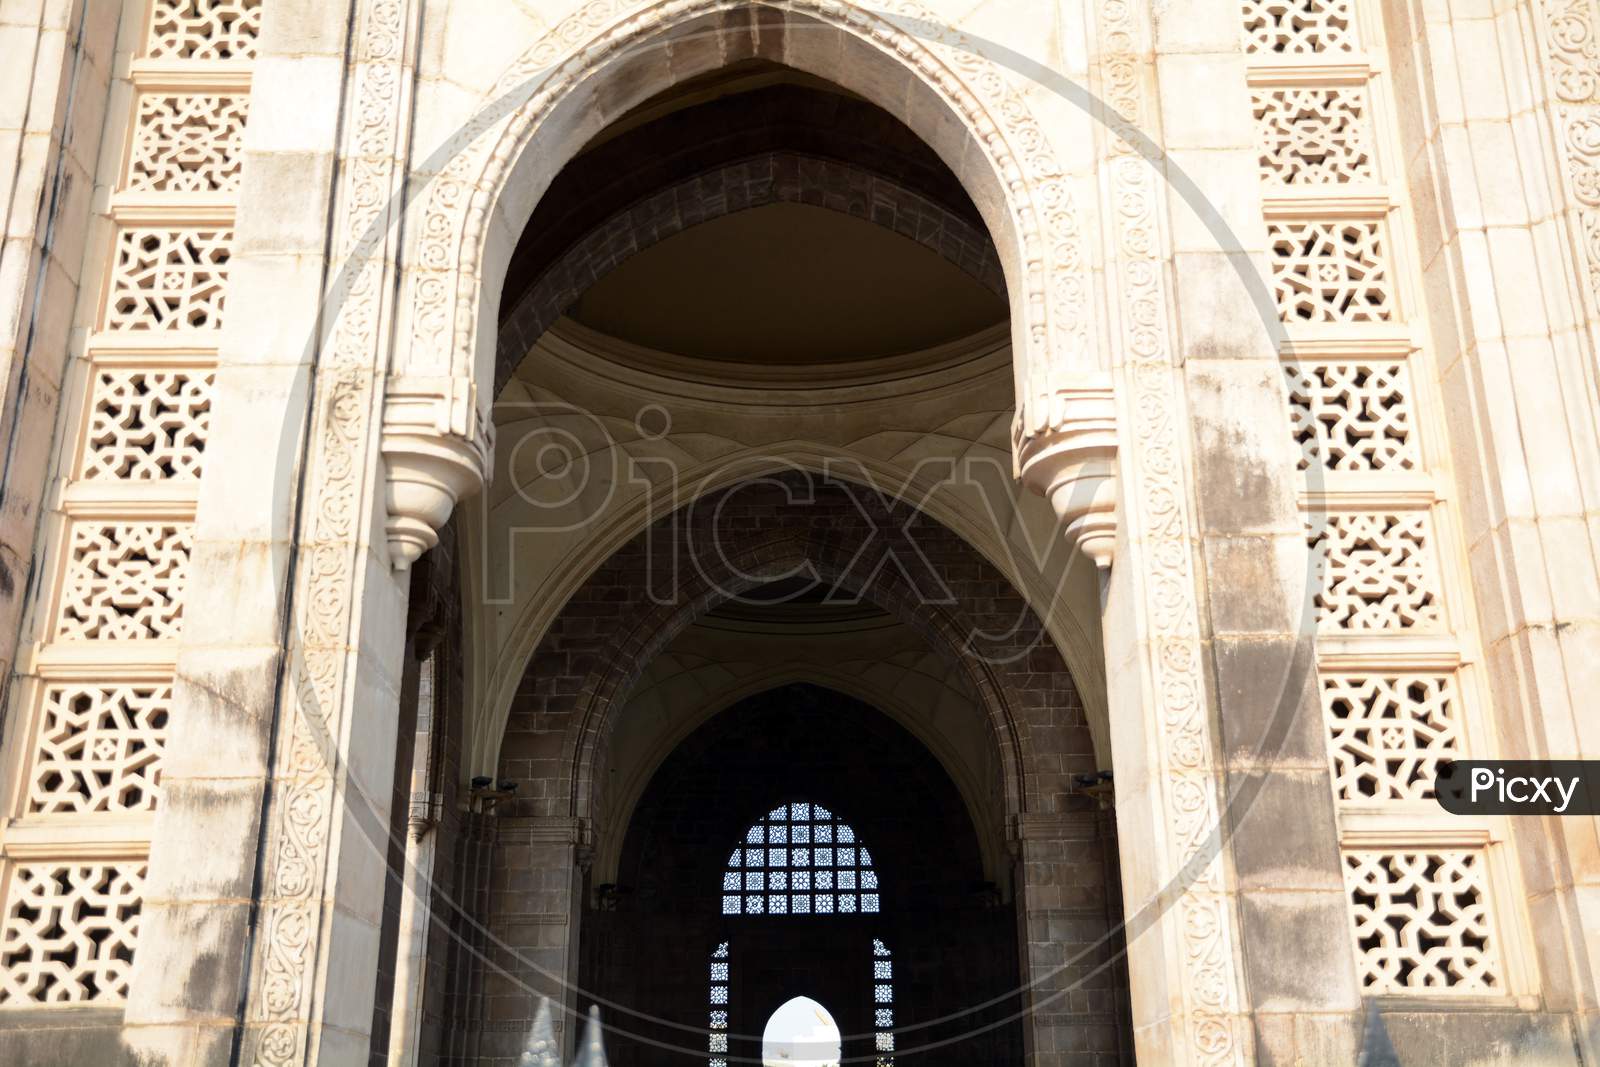 An Arch OF Gateway Of india